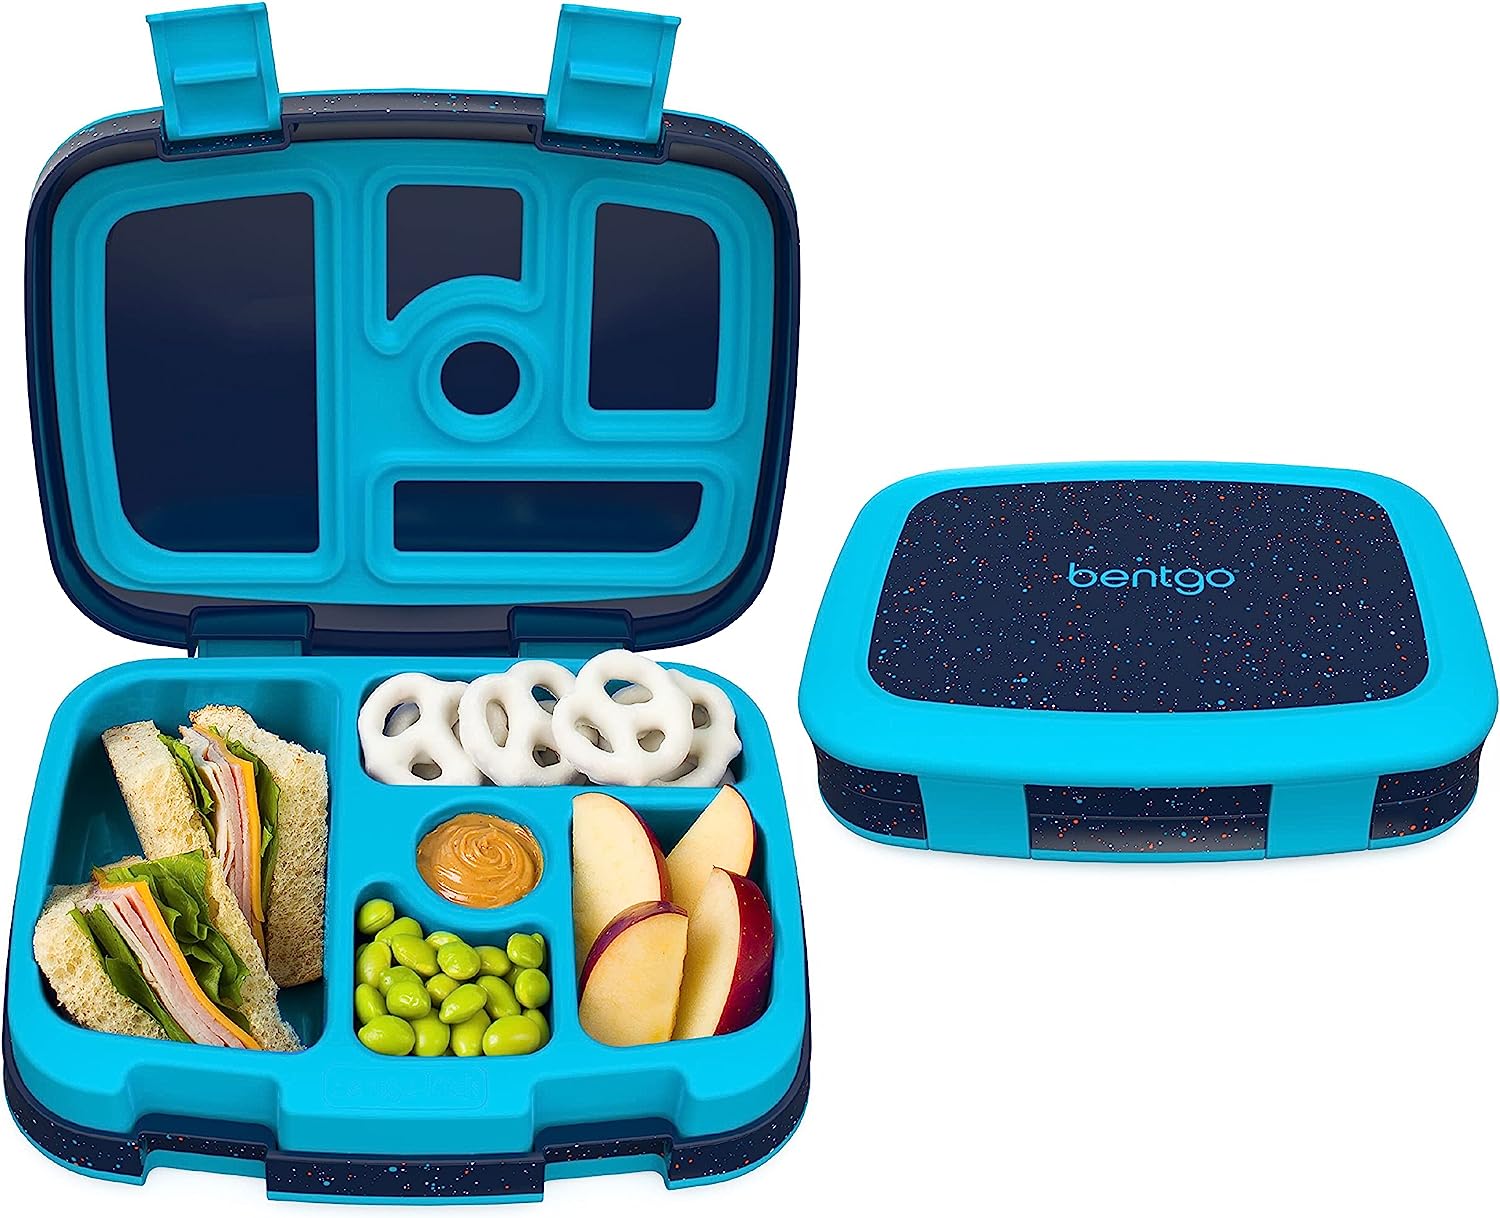 Bentgo - Bentgo Fresh and Kids Lunch Box (2-Pack) - Military & First  Responder Discounts